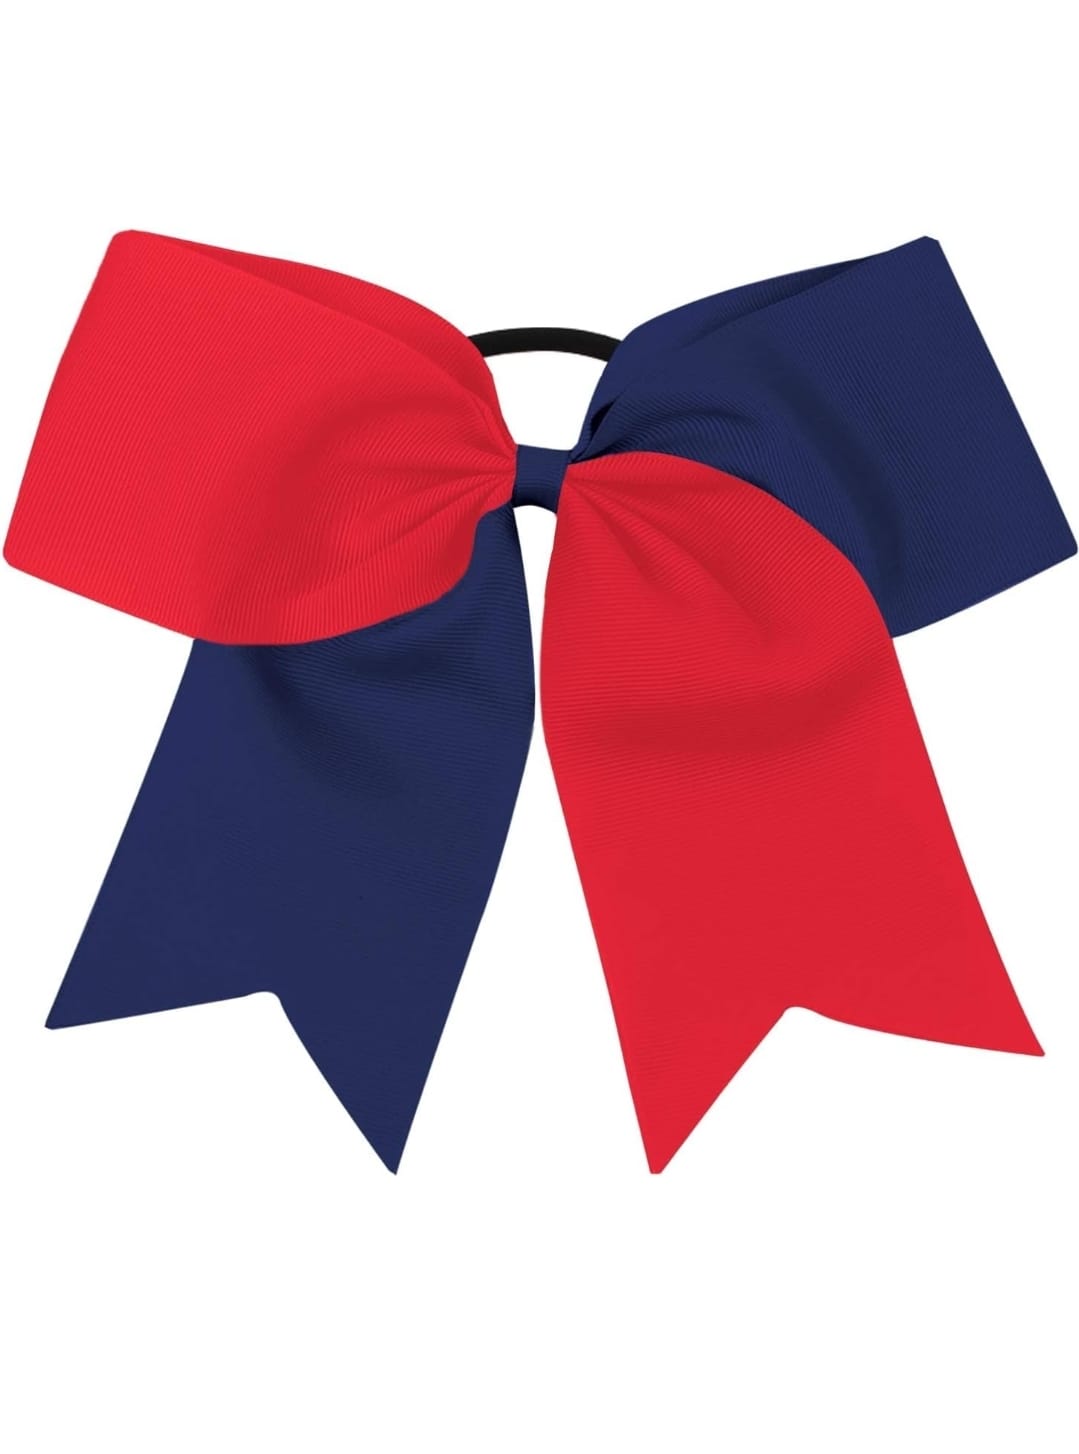 Red and Navy Blue Cheer Bow